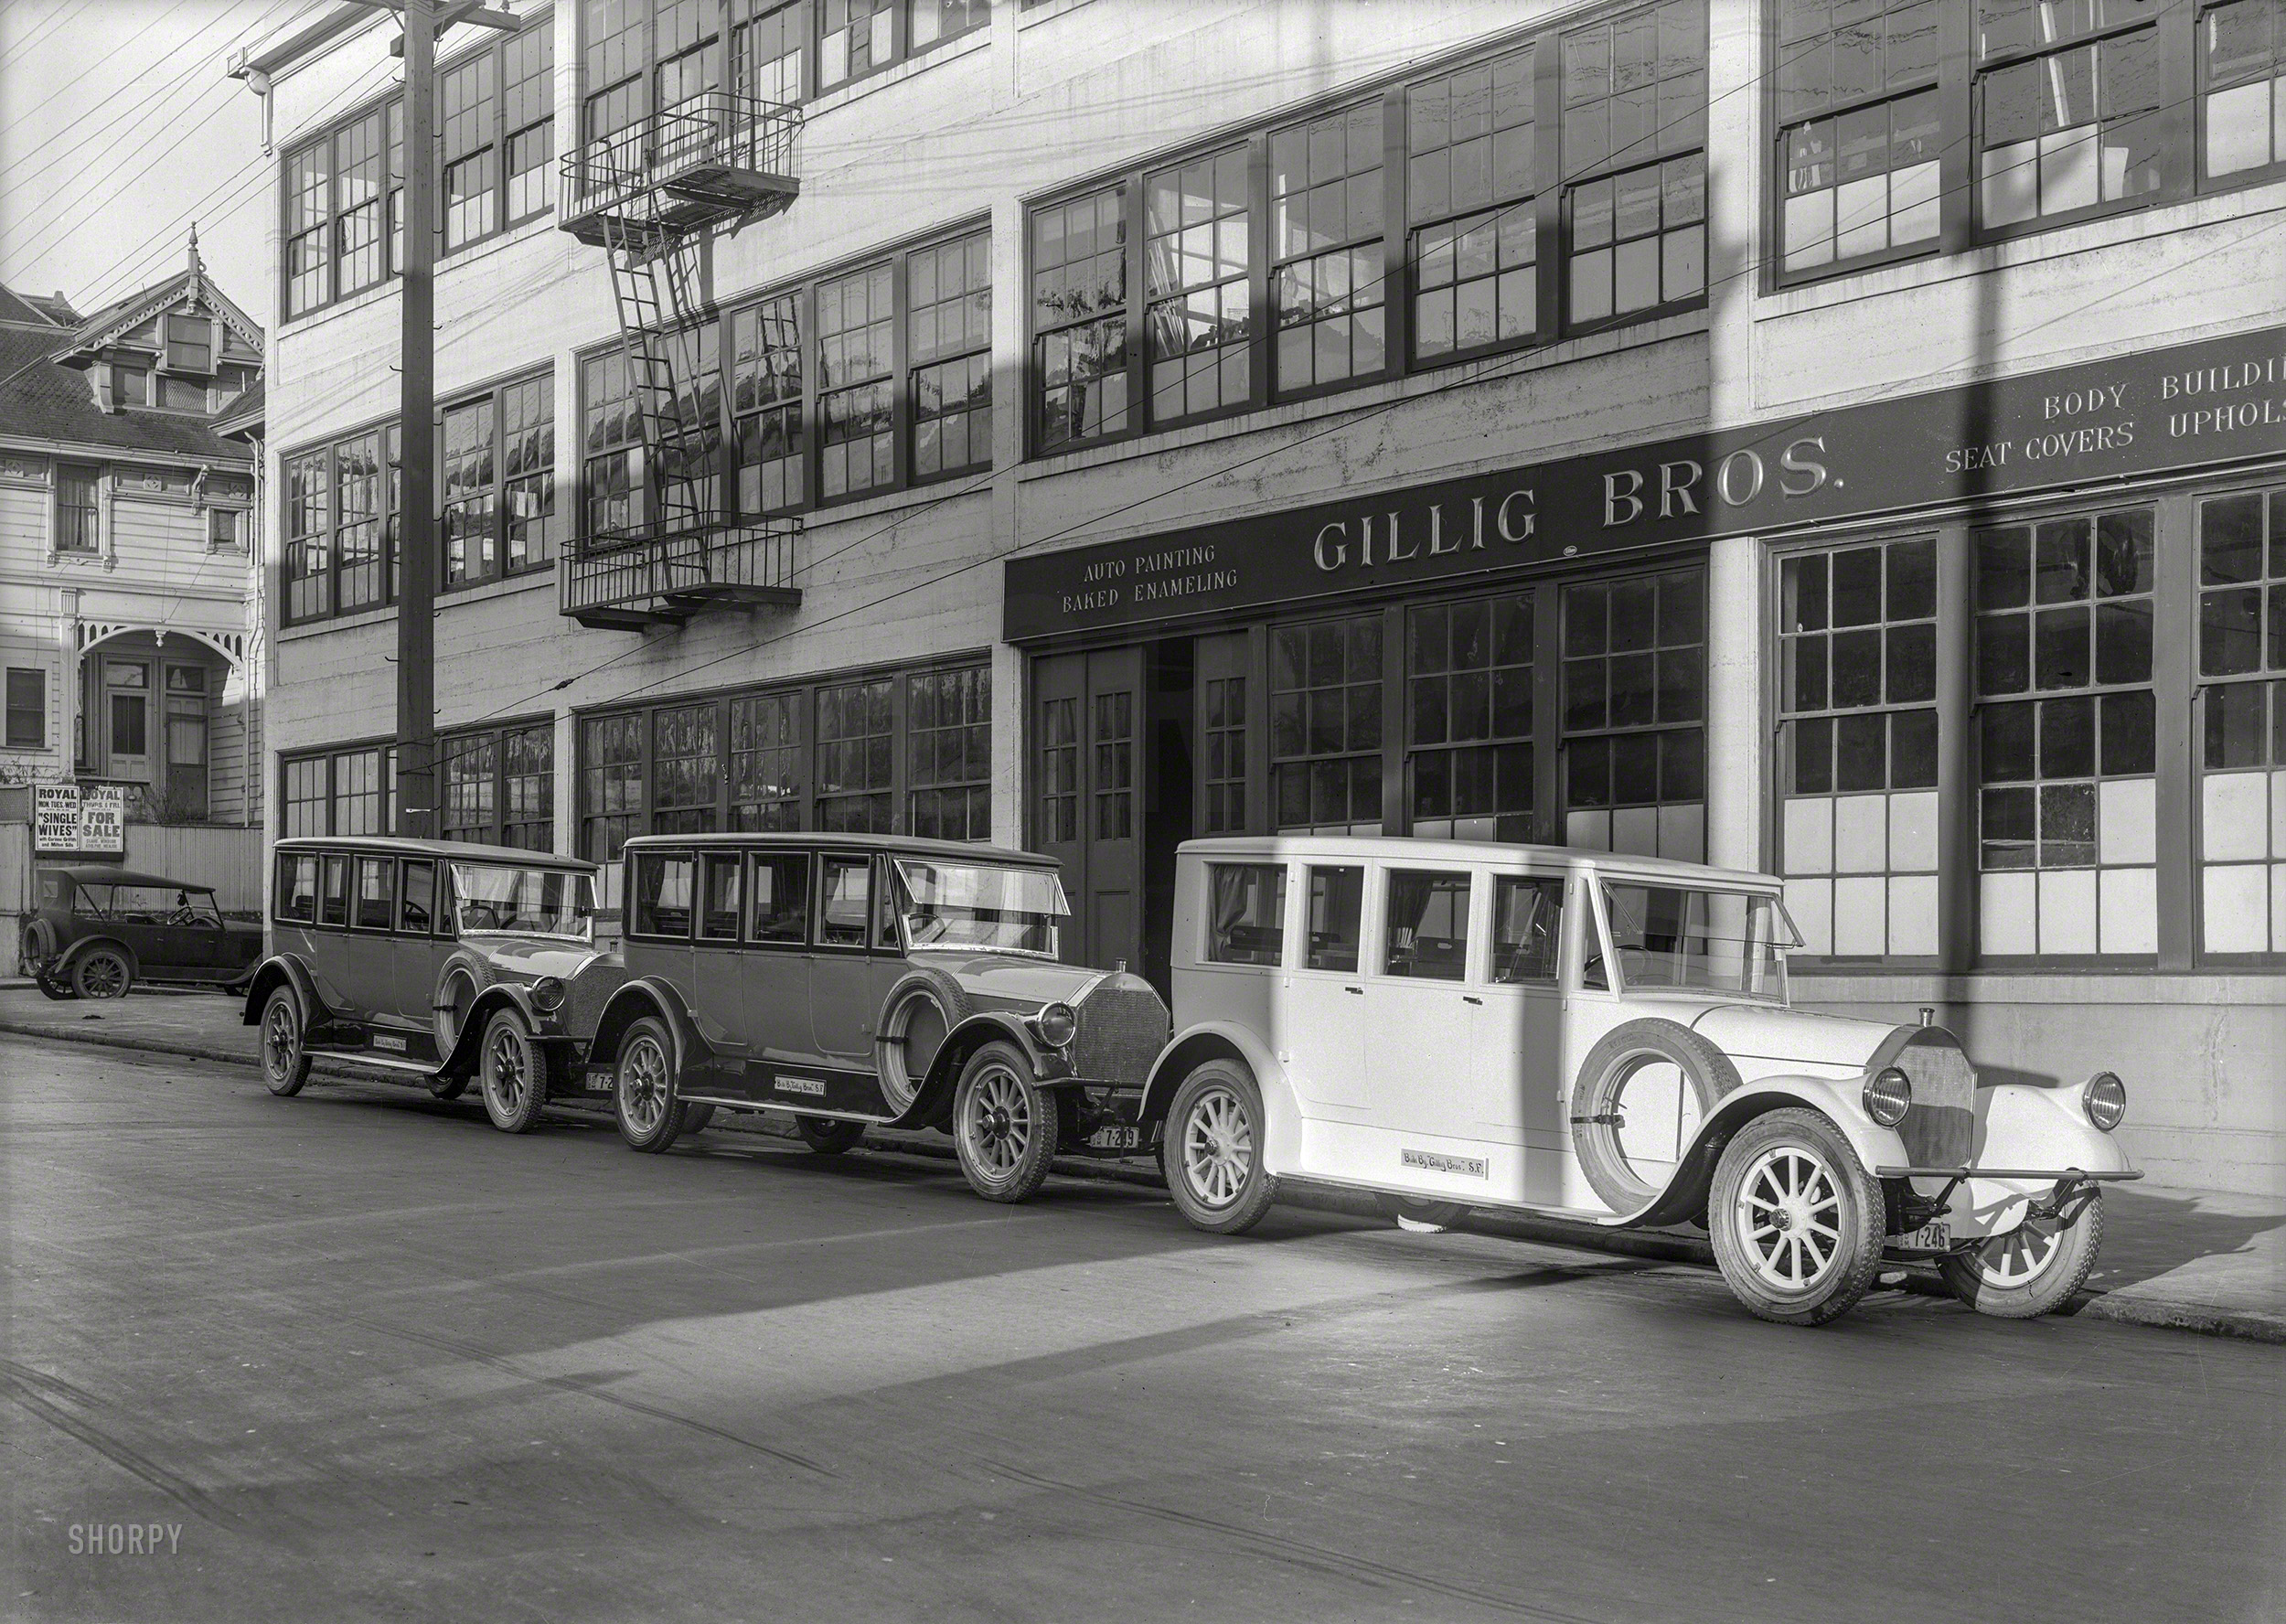 San Francisco, 1924. "Pierce-Arrow autos at Gillig Bros." Specialists in Body Building, Seat Covers, Auto Painting and Upholstery. Now playing at the Royal: "Single Wives." 5x7 glass negative by Christopher Helin. View full size.